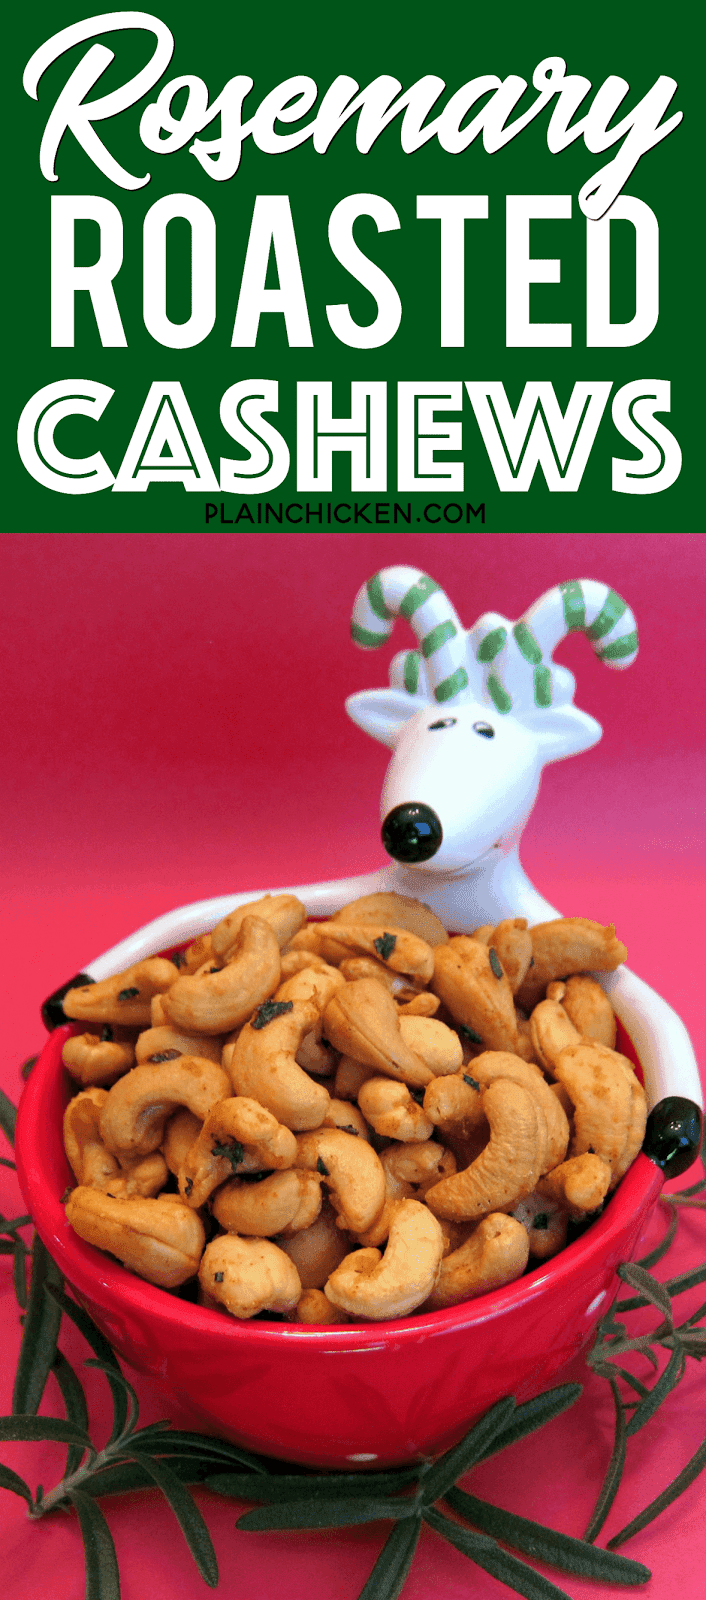 Rosemary Roasted Cashews - so easy and CRAZY good! Only 5 ingredients - cashews, rosemary, cayenne, butter and brown sugar. Ready in 10 minutes. Great for parties! Also makes a great homemade gift. #partyfood #cashews #partynuts